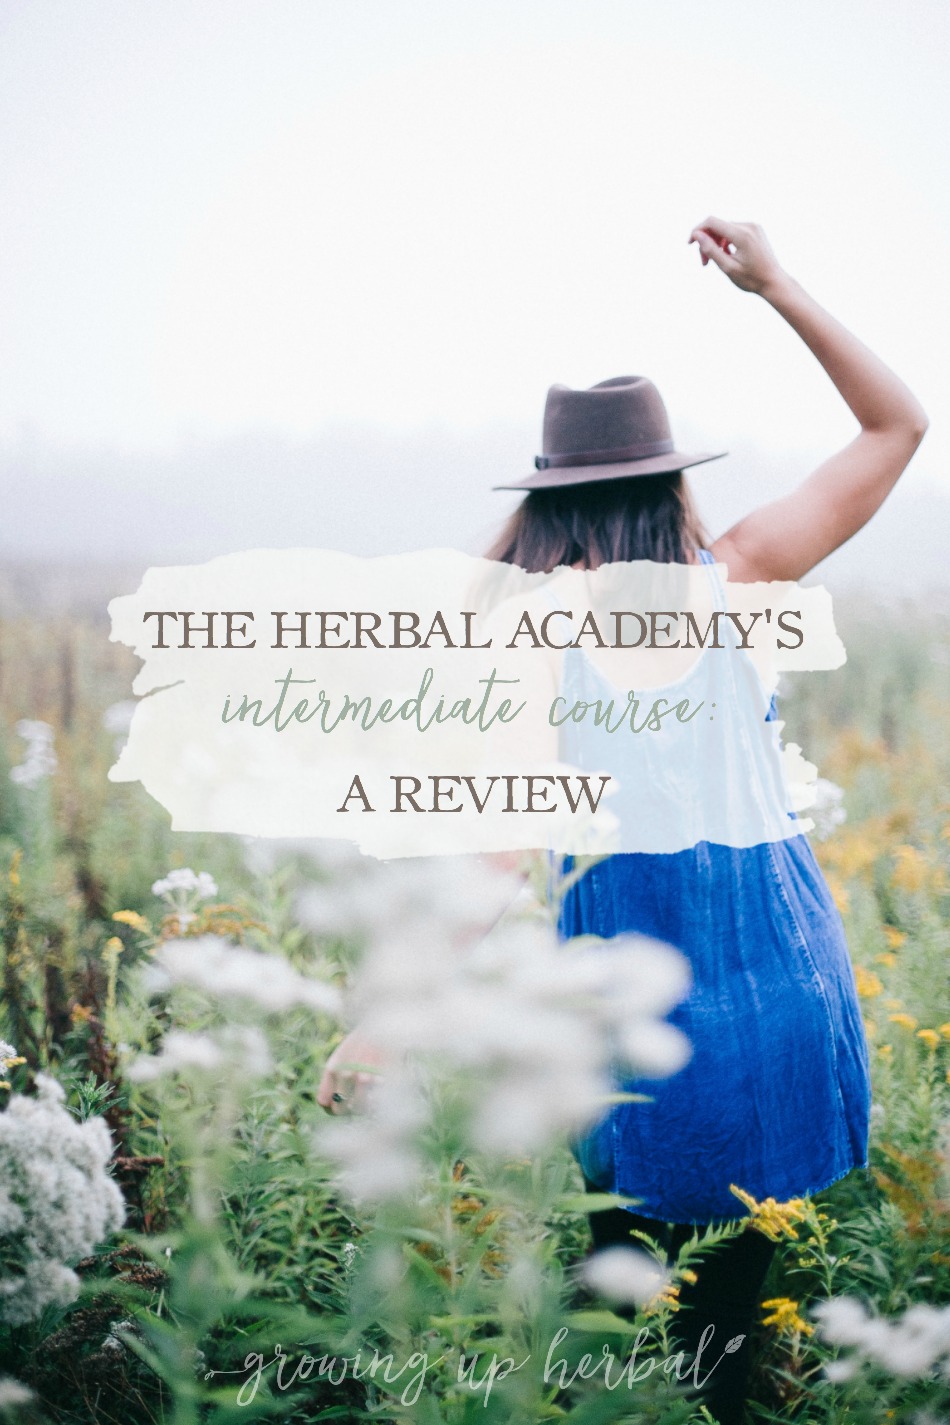 The Herbal Academy's Intermediate Herbal Course: A Review | Growing Up Herbal | Ever thought about going to herbal school at the Herbal Academy? If you're curious and you'd like an inside look, check out my review of their Intermediate Herbal Course right here!